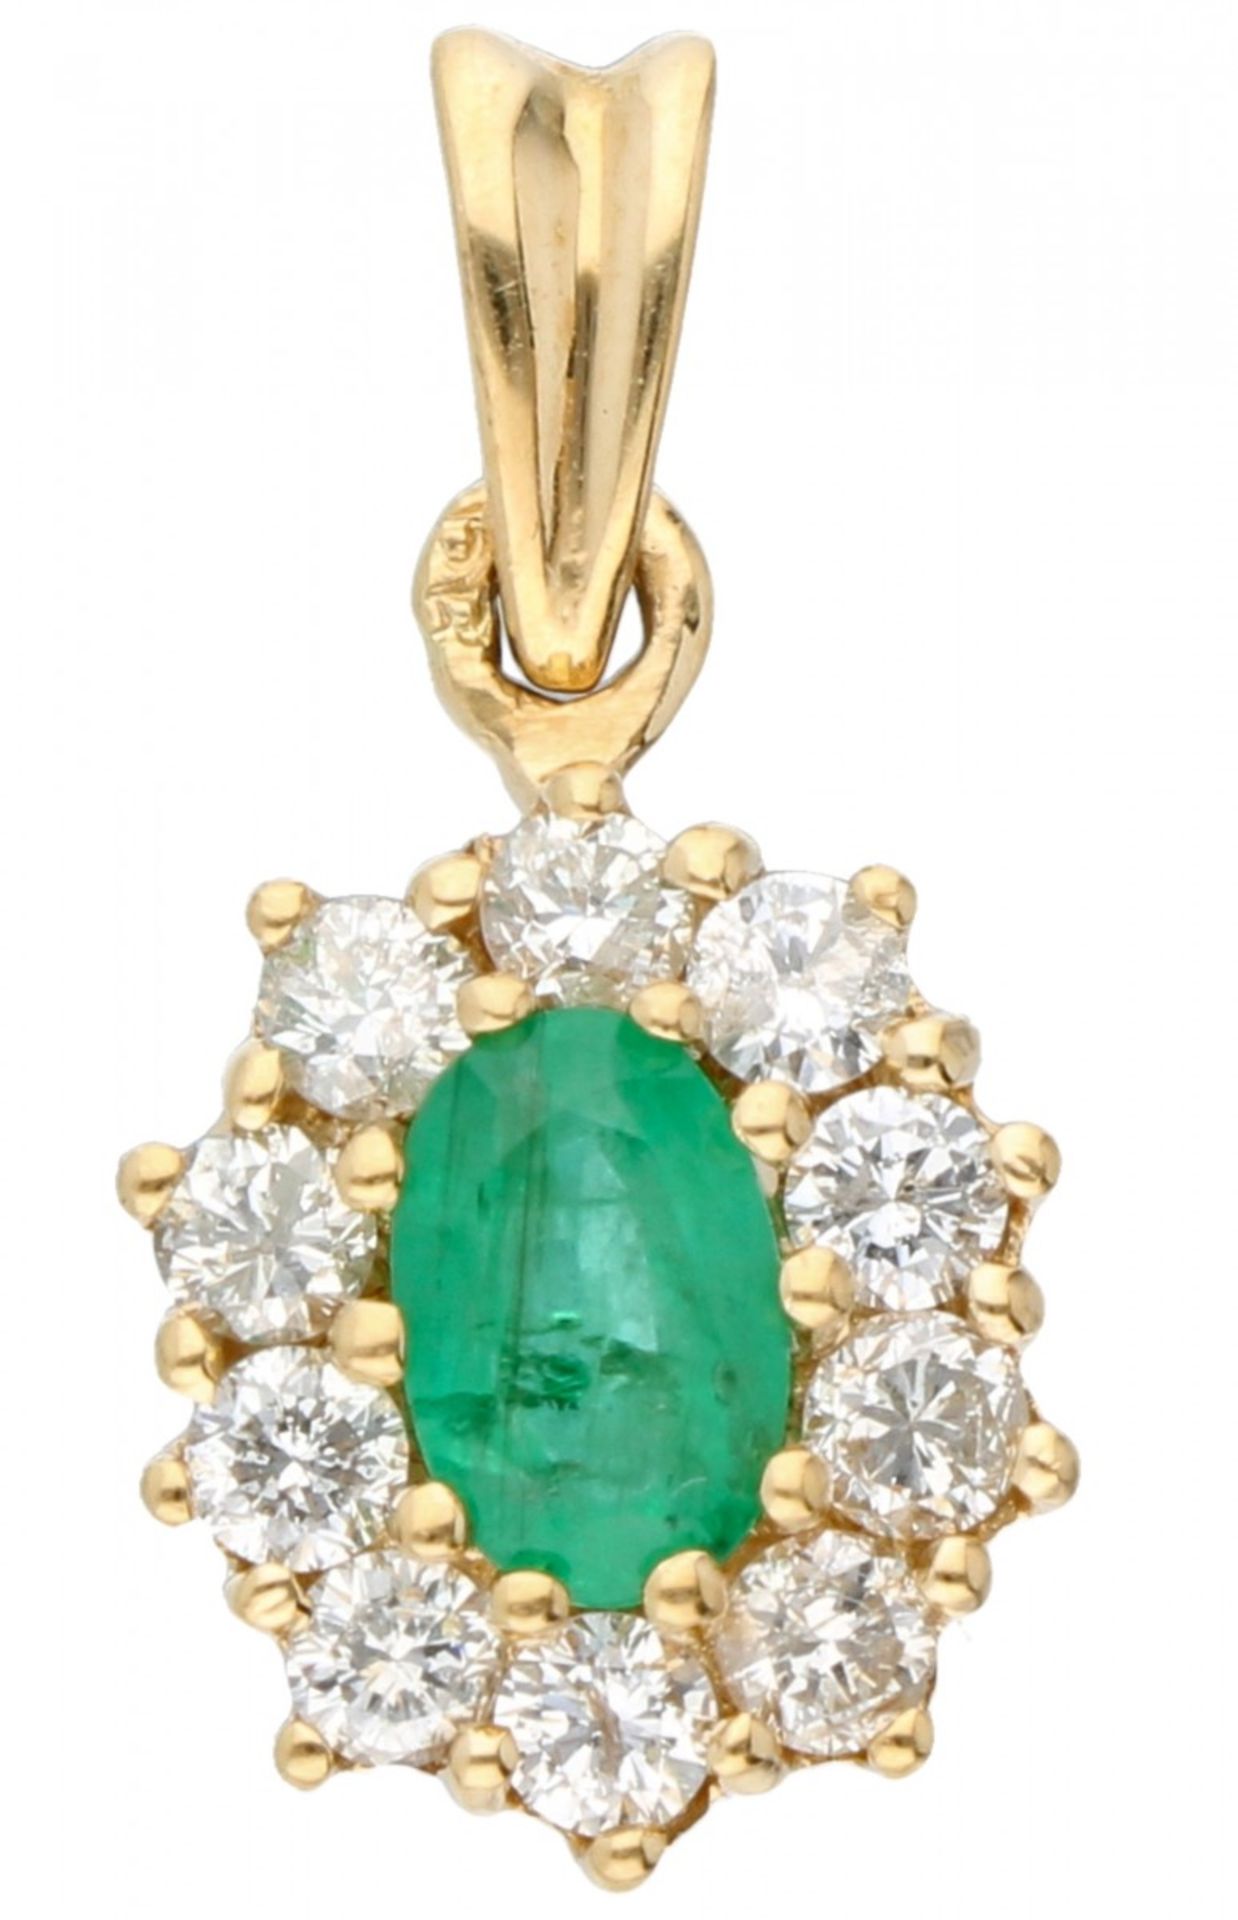 Yellow gold rosette pendant, with approx. 0.40 ct. diamond and natural emerald - 18 ct.